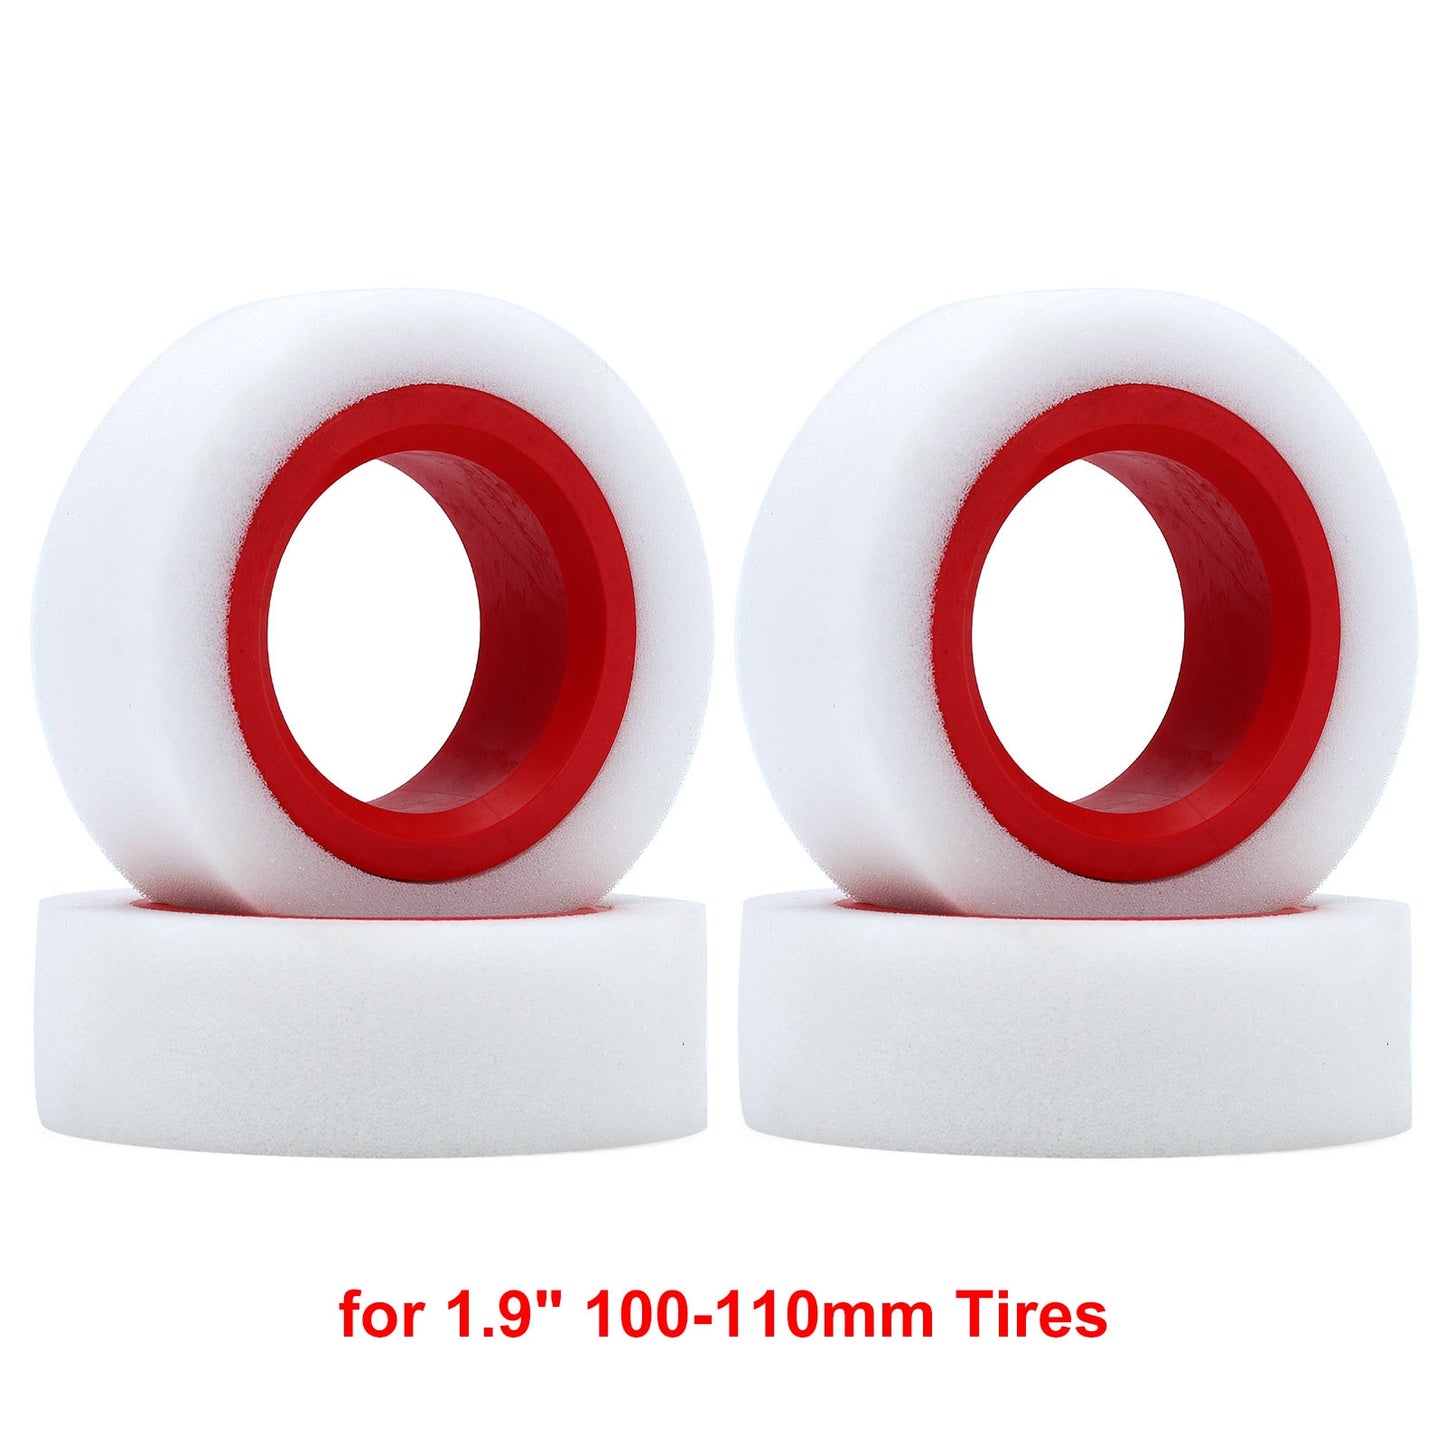 INJORA Dual Stage TPE Foam 114-120mm 100-110mm Fit 1.9&quot; Wheel Tires for RC Crawler Axial SCX10 90046 TRX4